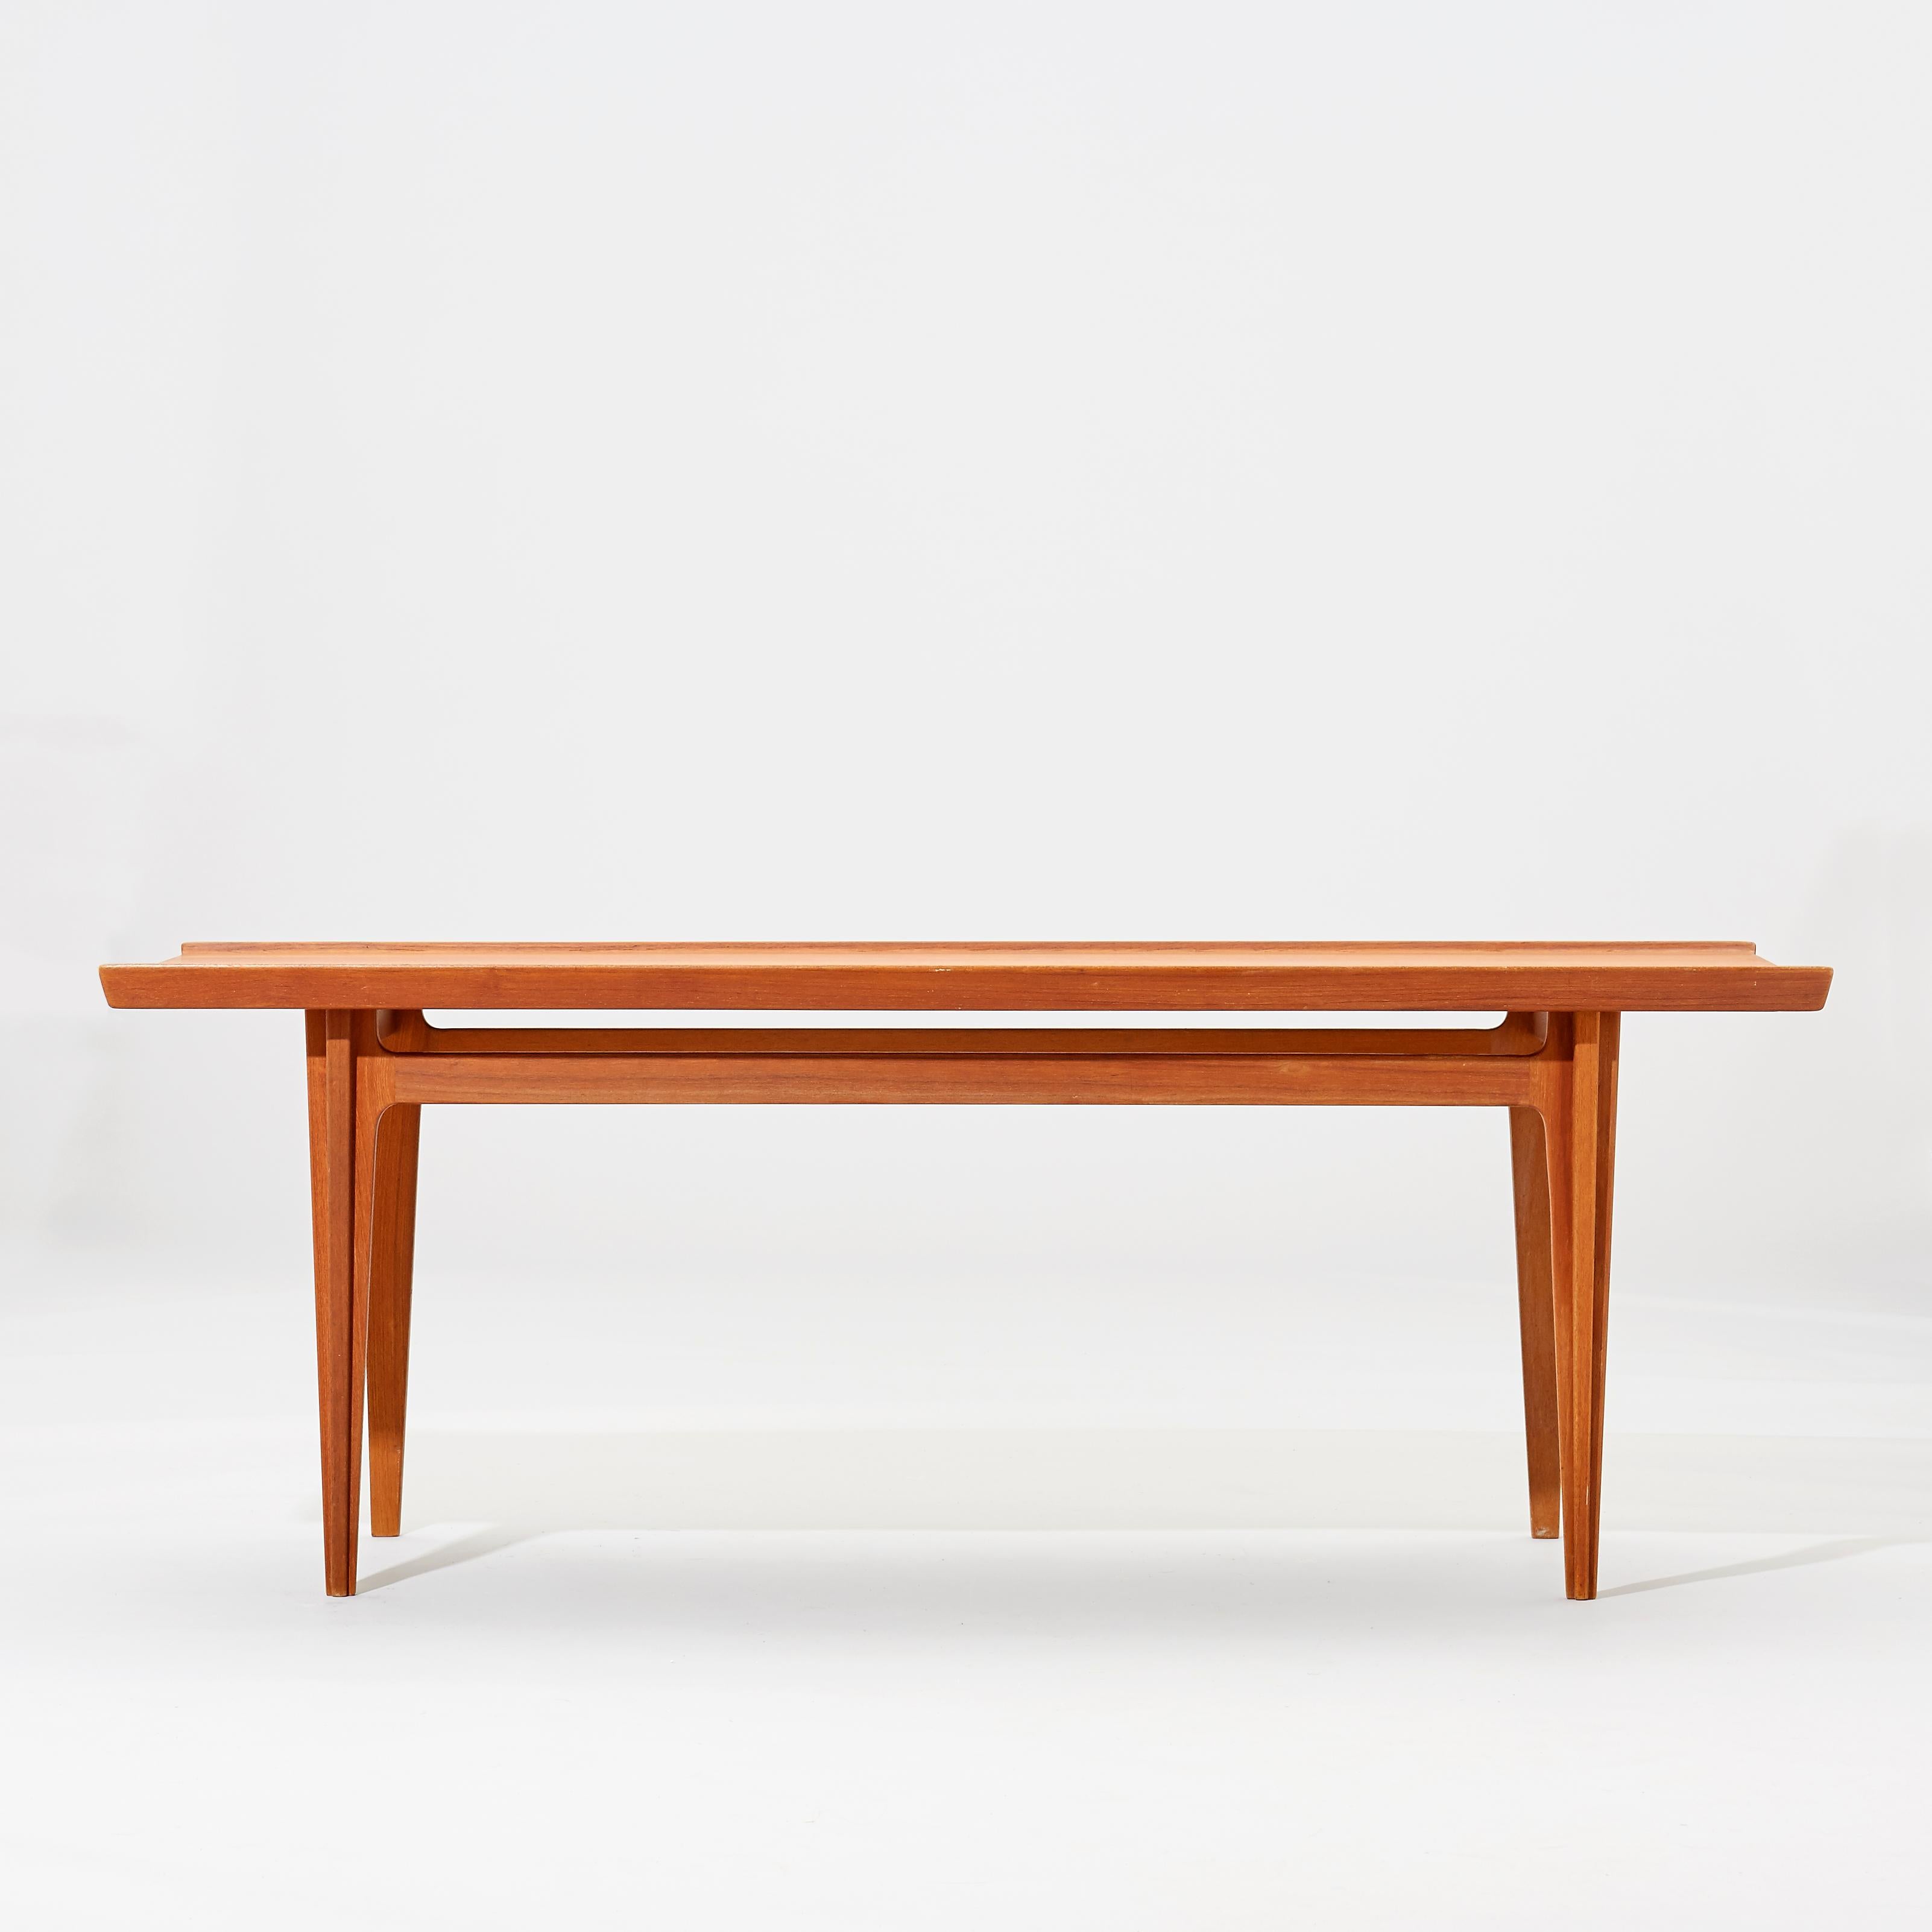 Solid teak coffee table, model 532, by Finn Juhl for France & Son. Designed in 1959 and this one manufactured during the period 1959-1964.